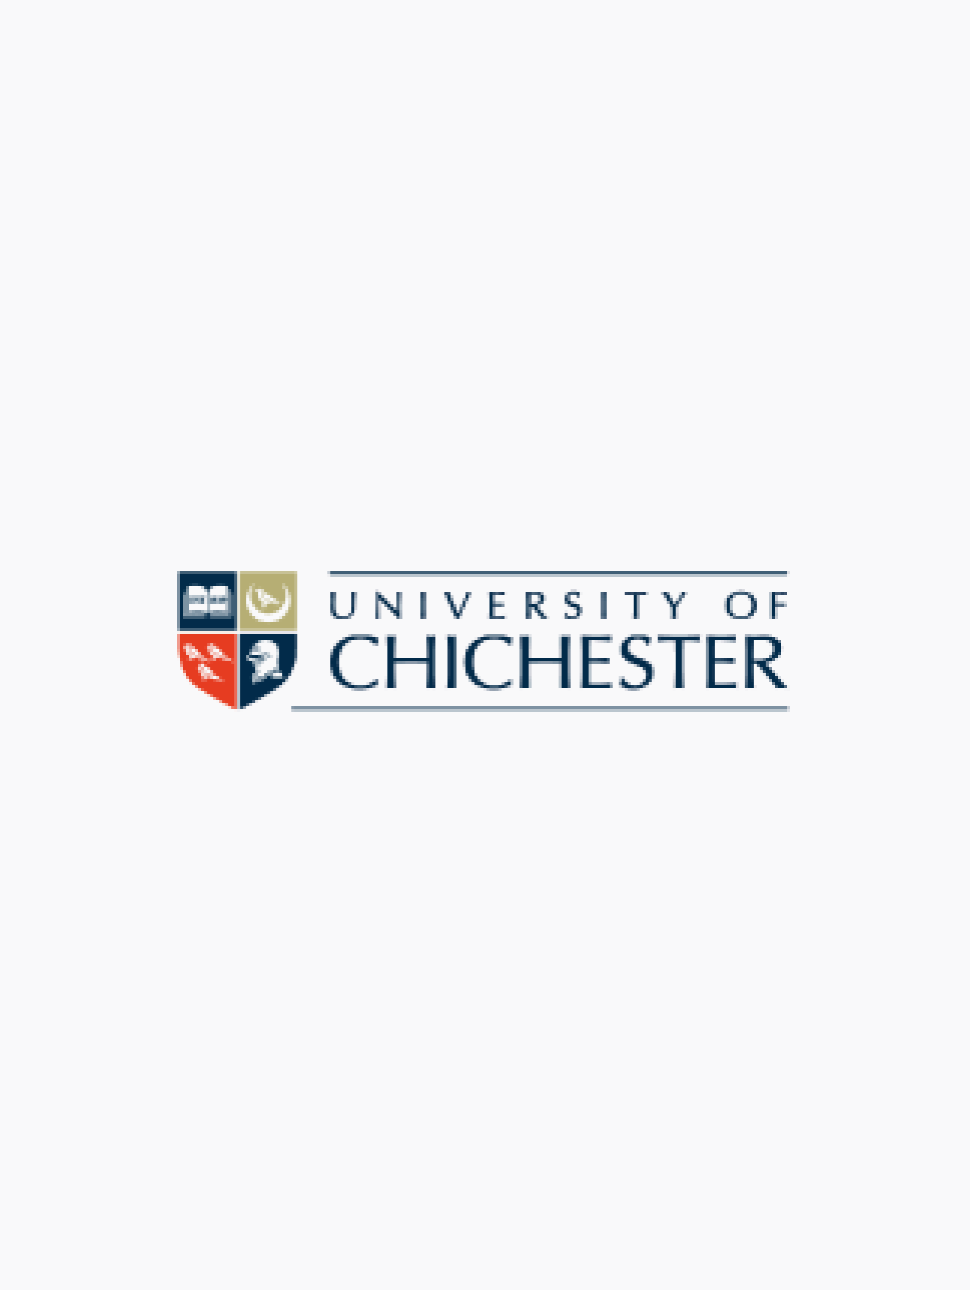 university_chichester_logo.png